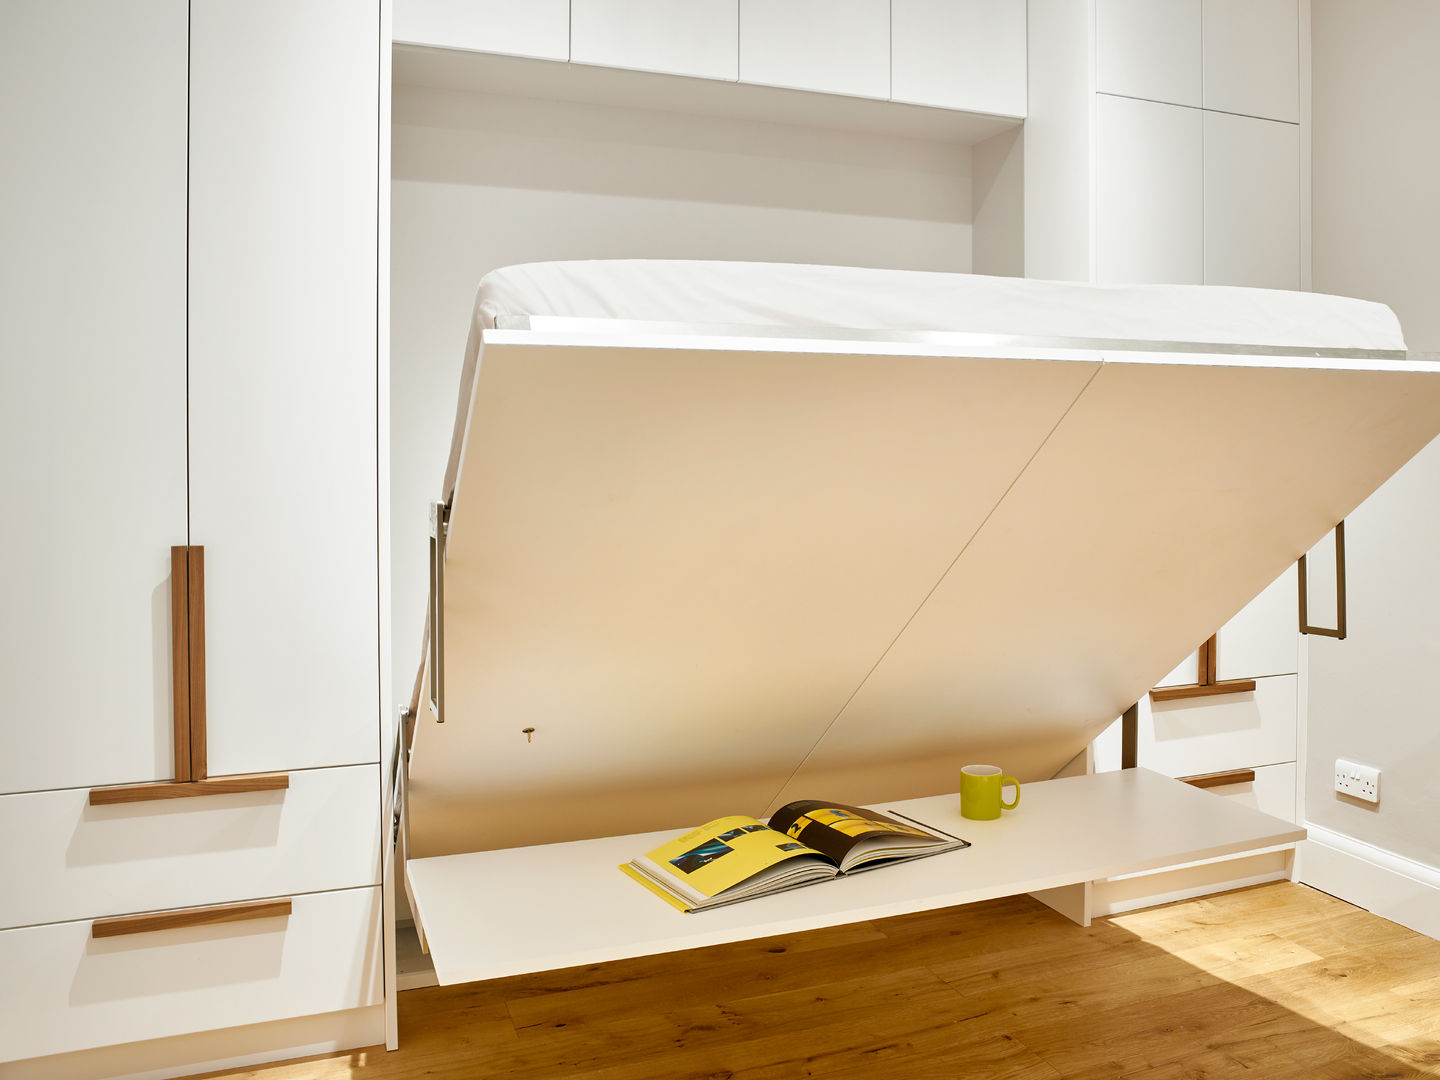 Guest bedroom Morph Interior Ltd 모던스타일 침실 Joinery,drop down bed,guest bed,bed,pull down bed,desk,white